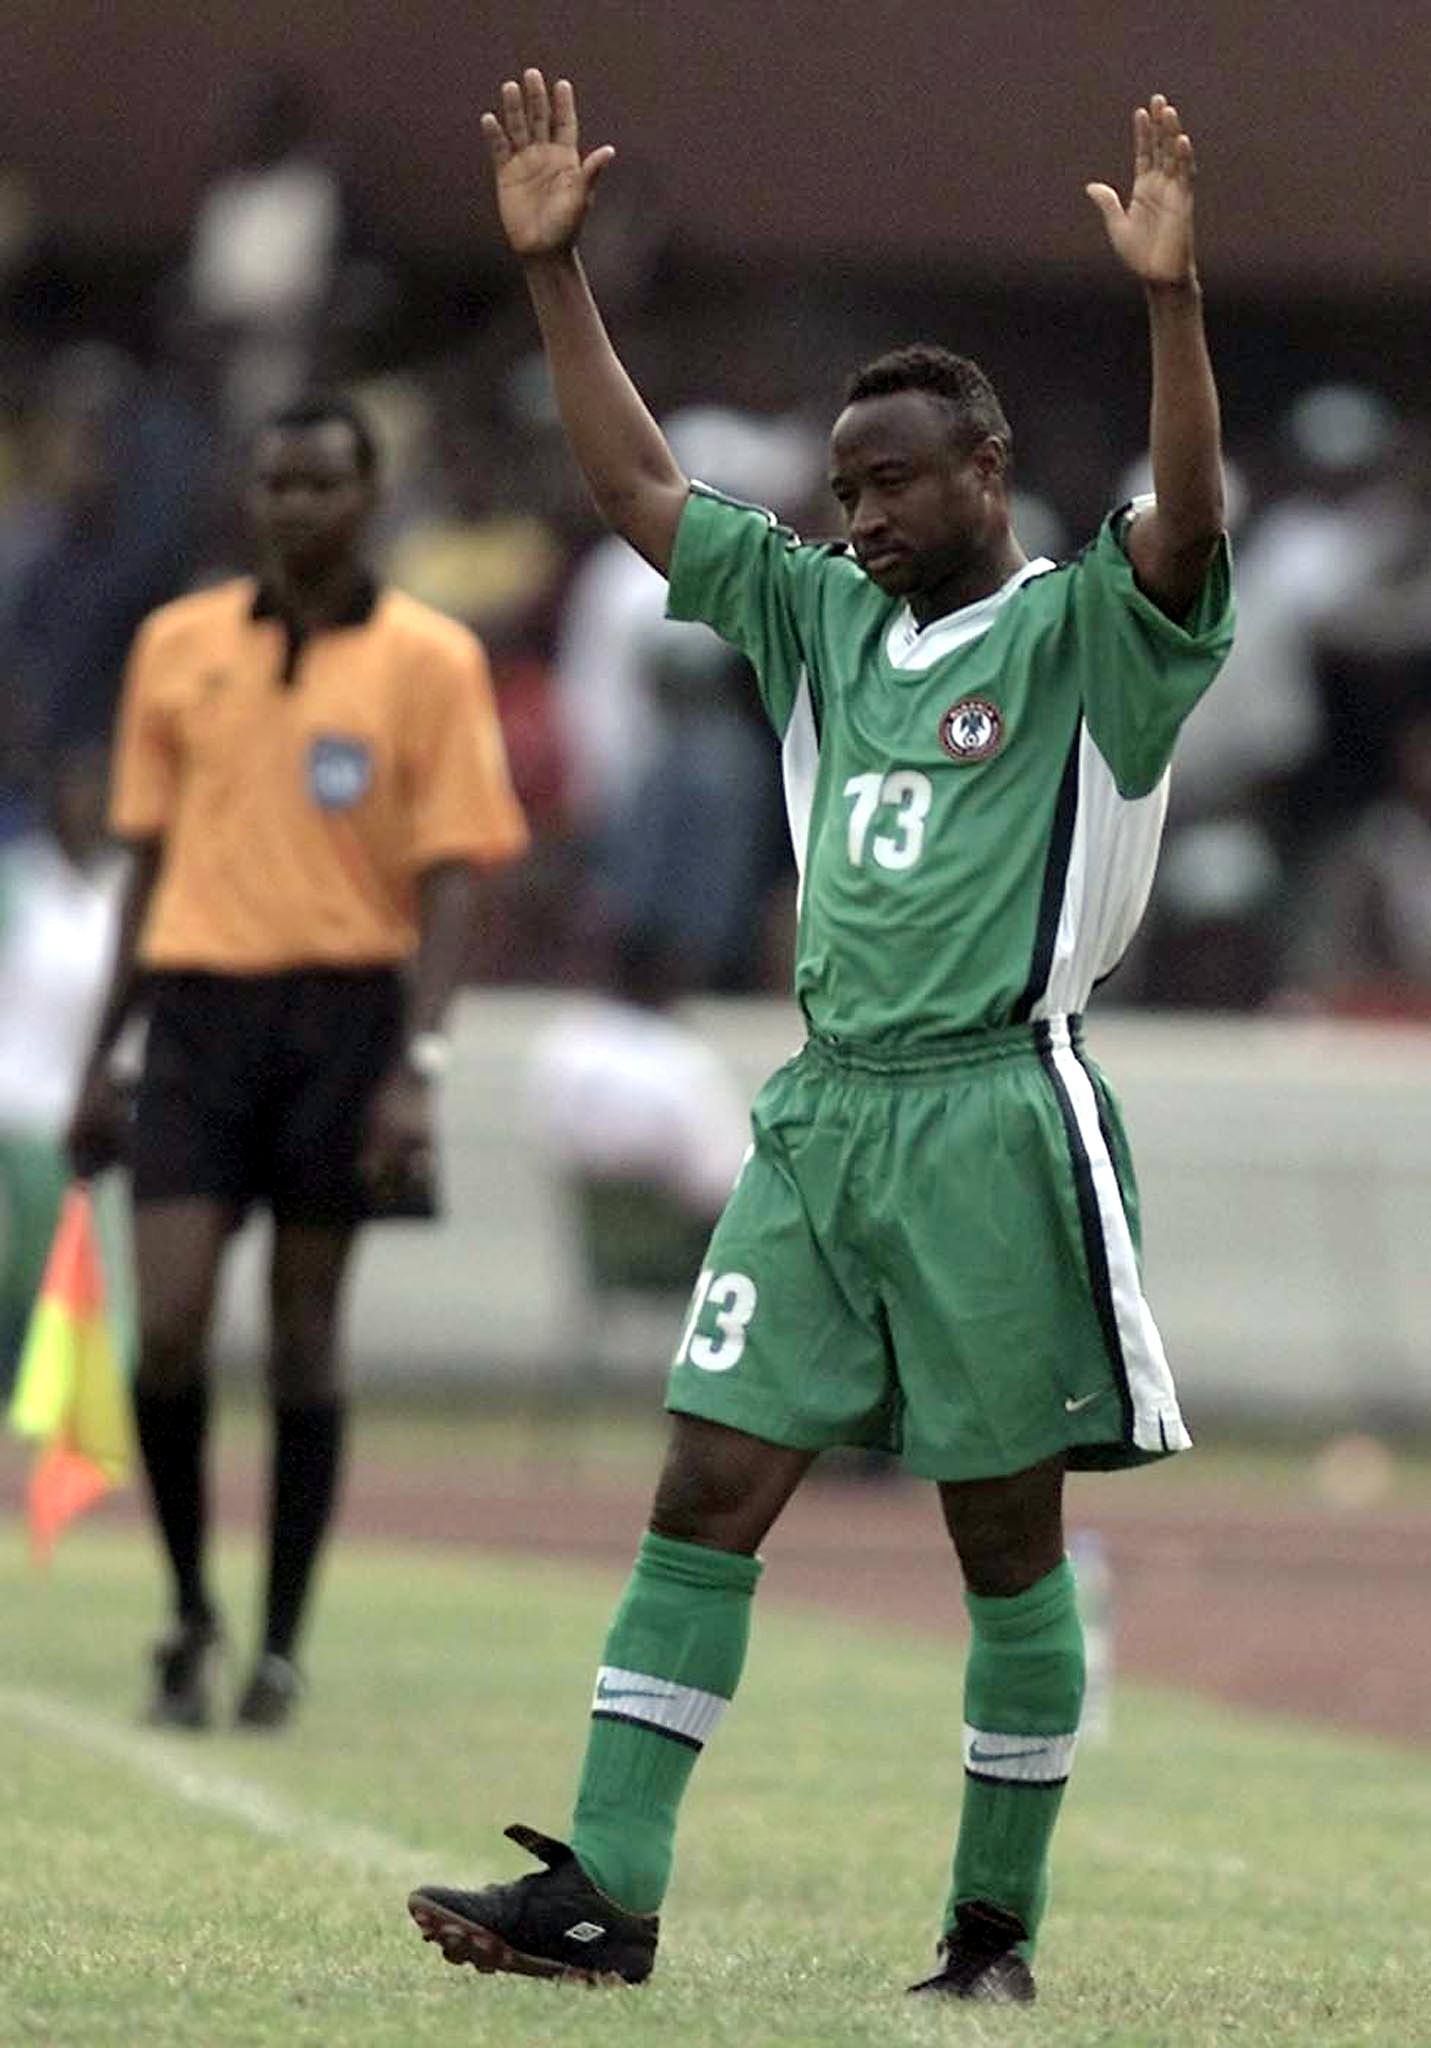 Nigerian player Tijani Babangida waves as he enters the pitch 23 January 2000 for the match Nigeria vs Tunisia in Lagos, during the African Nations Cup. (ELECTRONIC IMAGE) (Photo by Olivier MORIN / AFP) (Photo by OLIVIER MORIN/AFP via Getty Images)